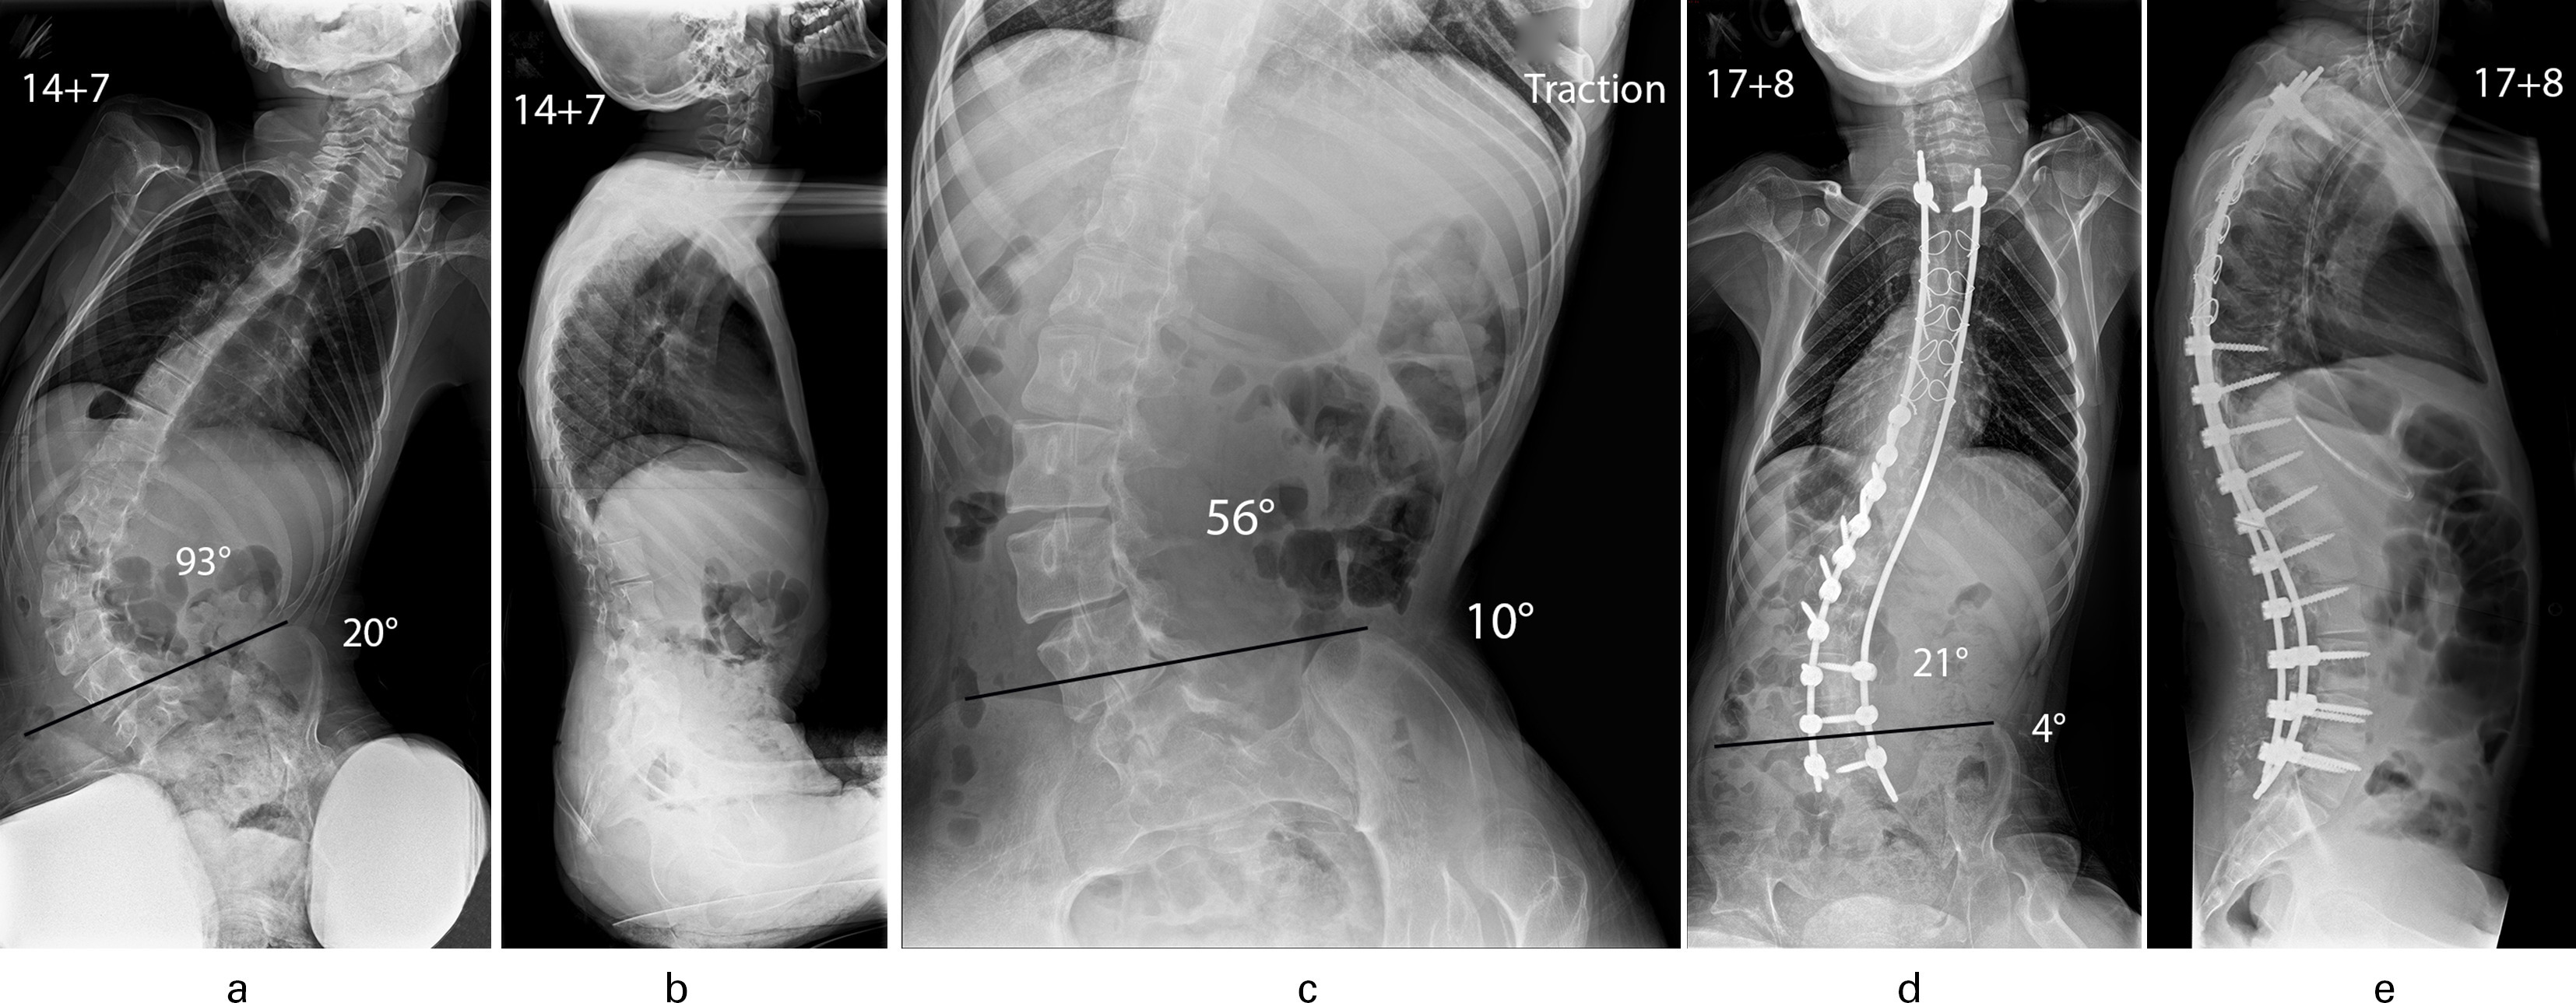 Fig. 3 
            Patient aged 14 years and seven months with quadriplegic cerebral palsy. a) Collapsing lumbar scoliosis (93o) with associated pelvic obliquity (20o). b) Increased thoracic kyphosis with elimination of normal lumbar lordosis and positive global sagittal balance of the spine. c) Supine traction radiograph shows the scoliosis to improve to 56o and the pelvic obliquity to retain flexibility and correct to 10o. d) Excellent correction of scoliosis to 21o and marked improvement of pelvic obliquity to 4o was maintained at follow-up (aged 17 years and eight months) after a posterior spinal fusion using a hybrid segmental pedicle screw/sublaminar wire/rod construct extending distally to L5; E: Spinal surgery restored thoracic kyphosis/lumbar lordosis and balanced the spine.
          